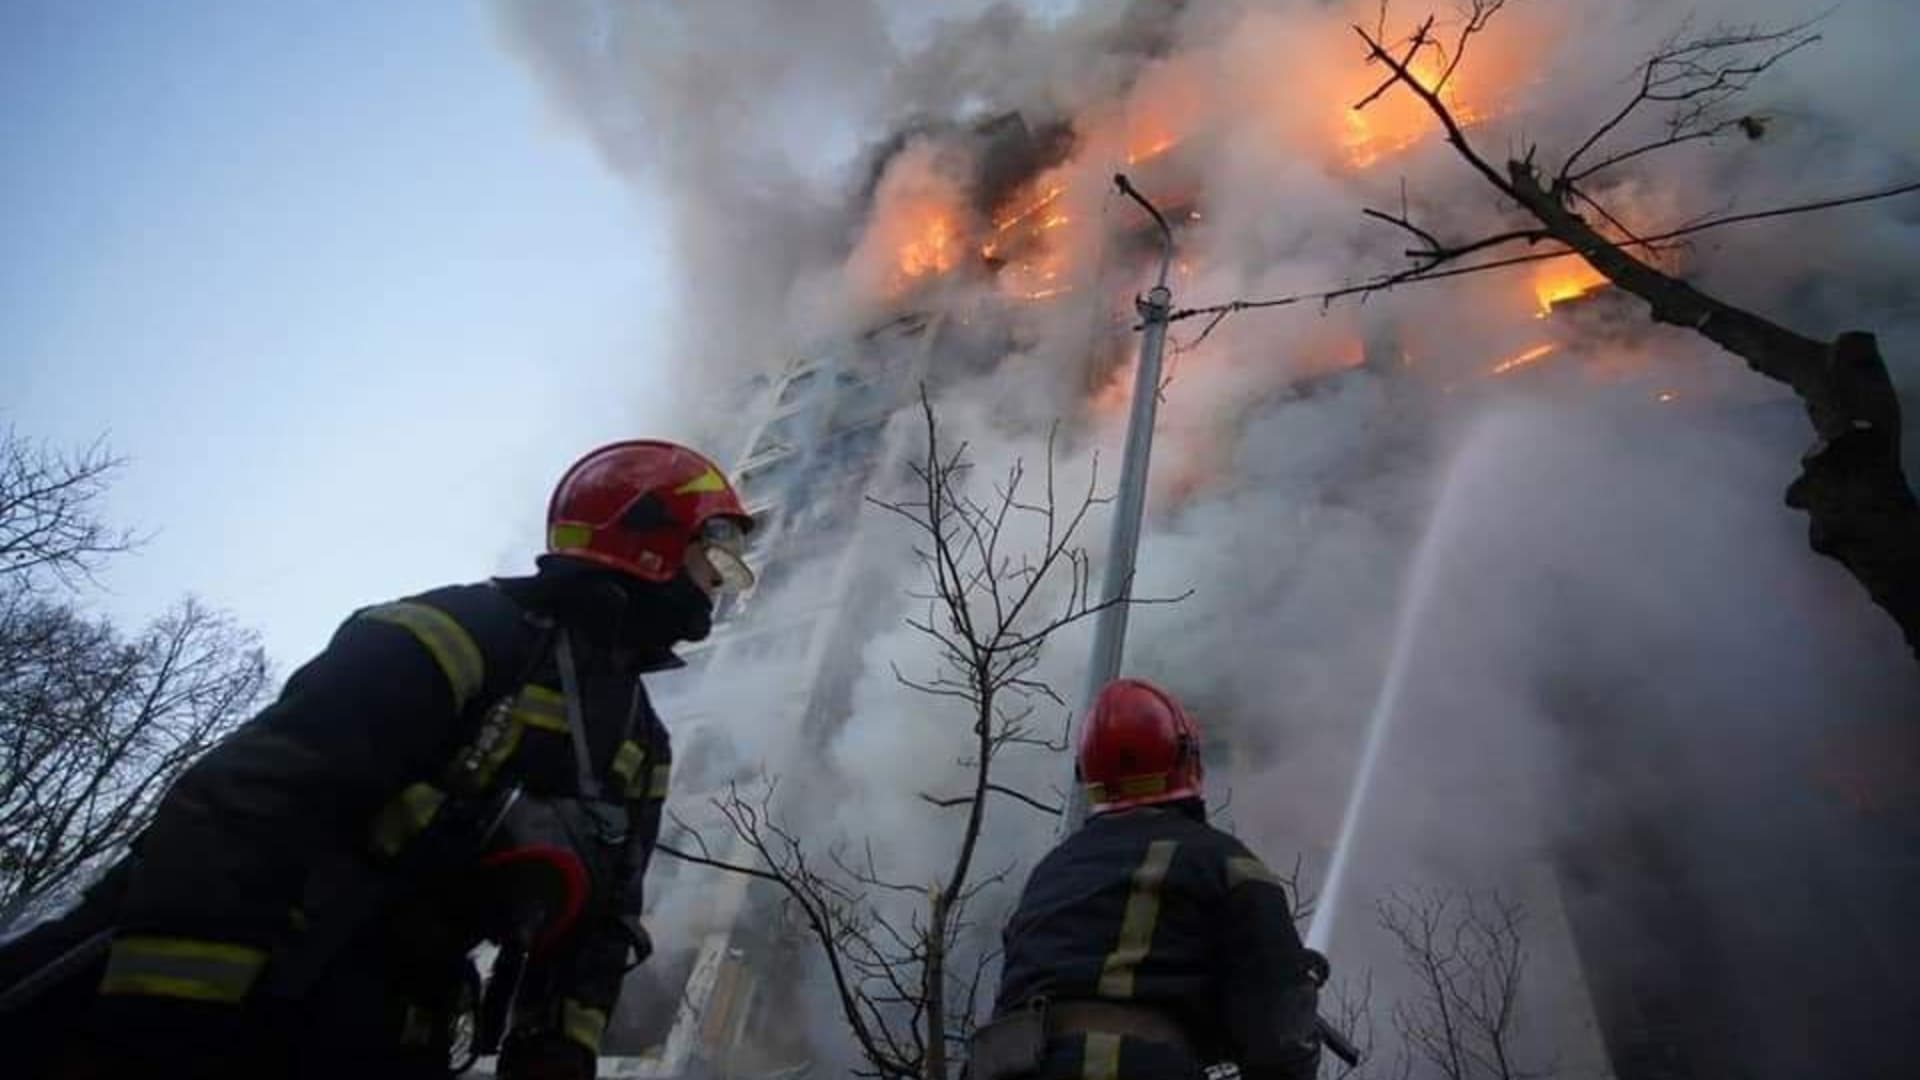 Firefighters try to extinguish a fire after a residential building hit by a Russian attack in Kyiv, Ukraine on March 15, 2022.